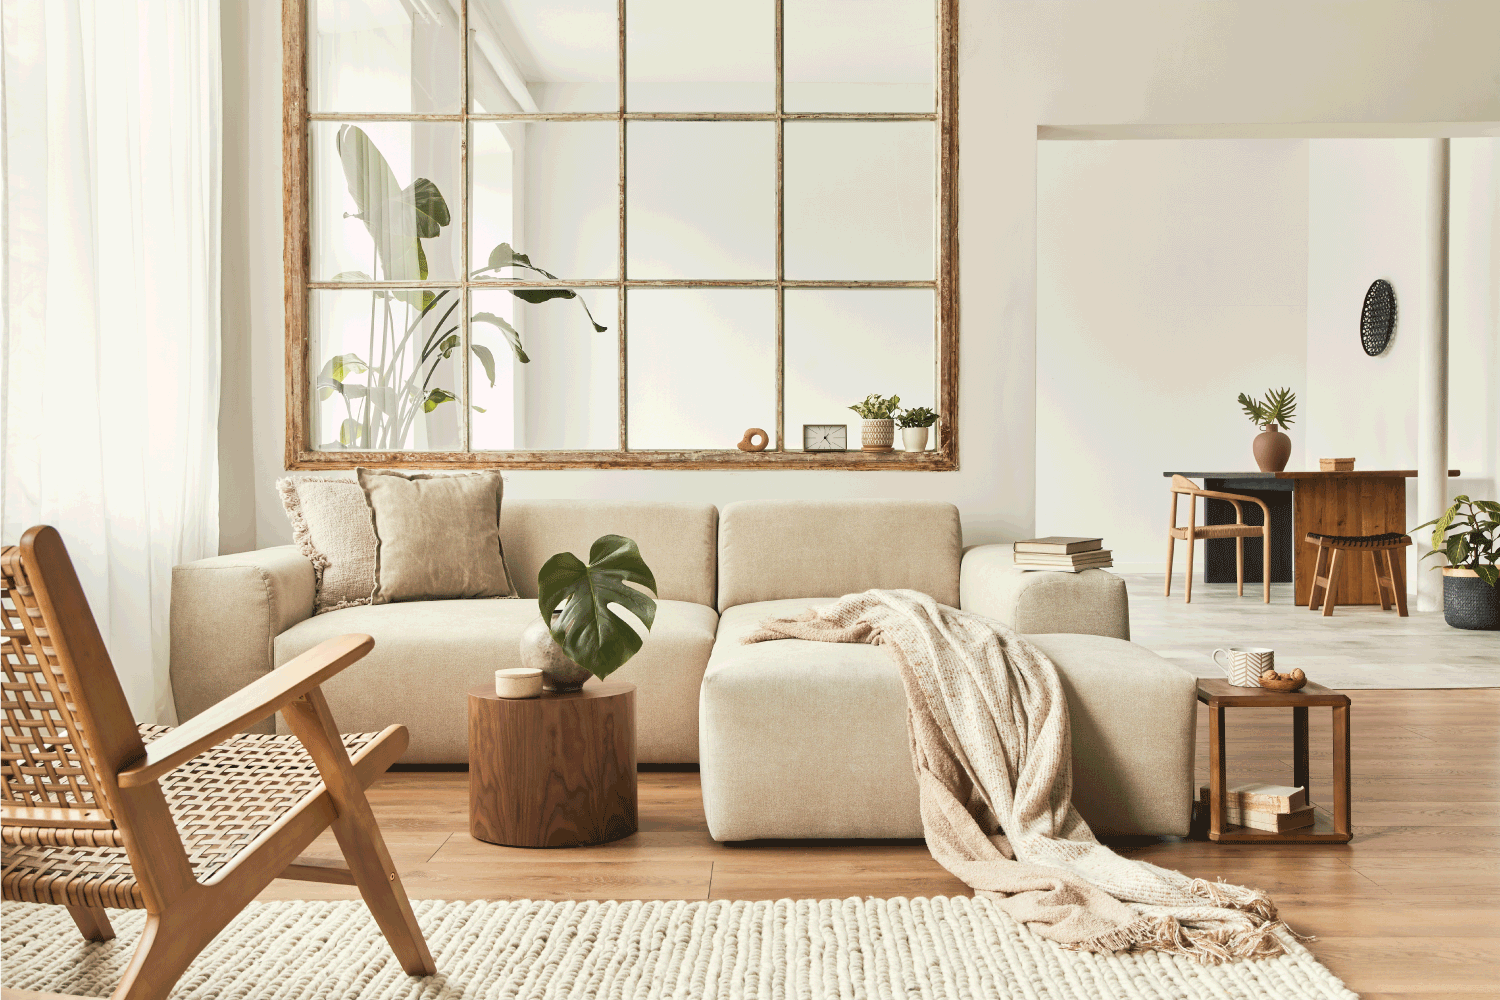 Modern interior of open space with design modular sofa, furniture, wooden coffee tables, plaid, pillows, tropical plants